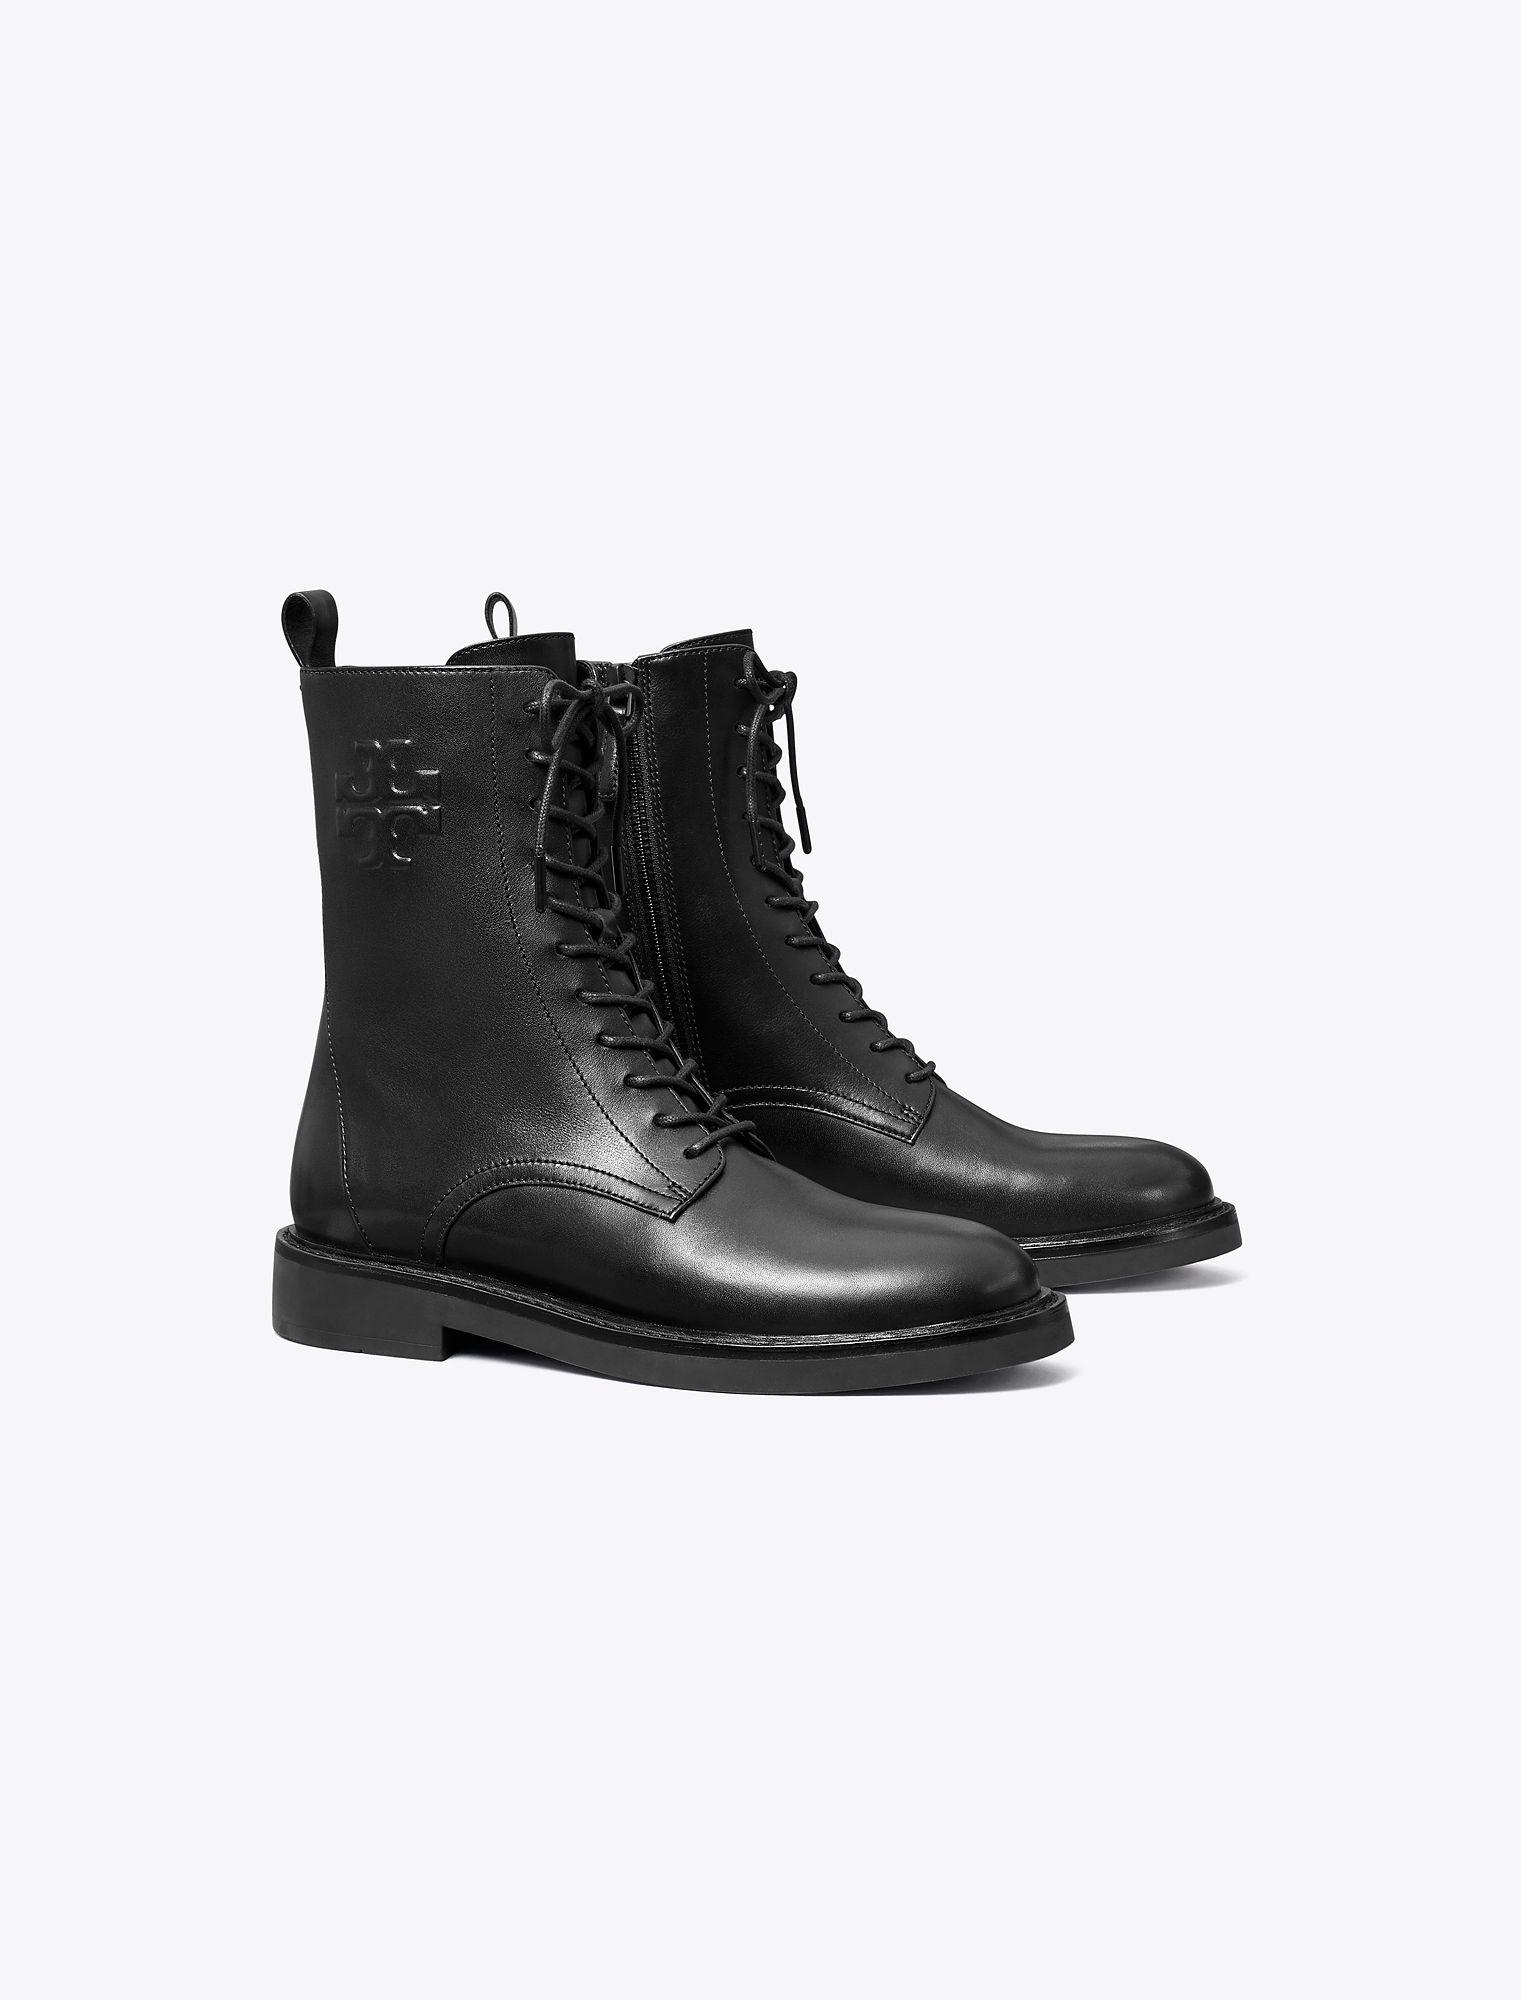 Tory Burch Double T Combat Boot in Black | Lyst